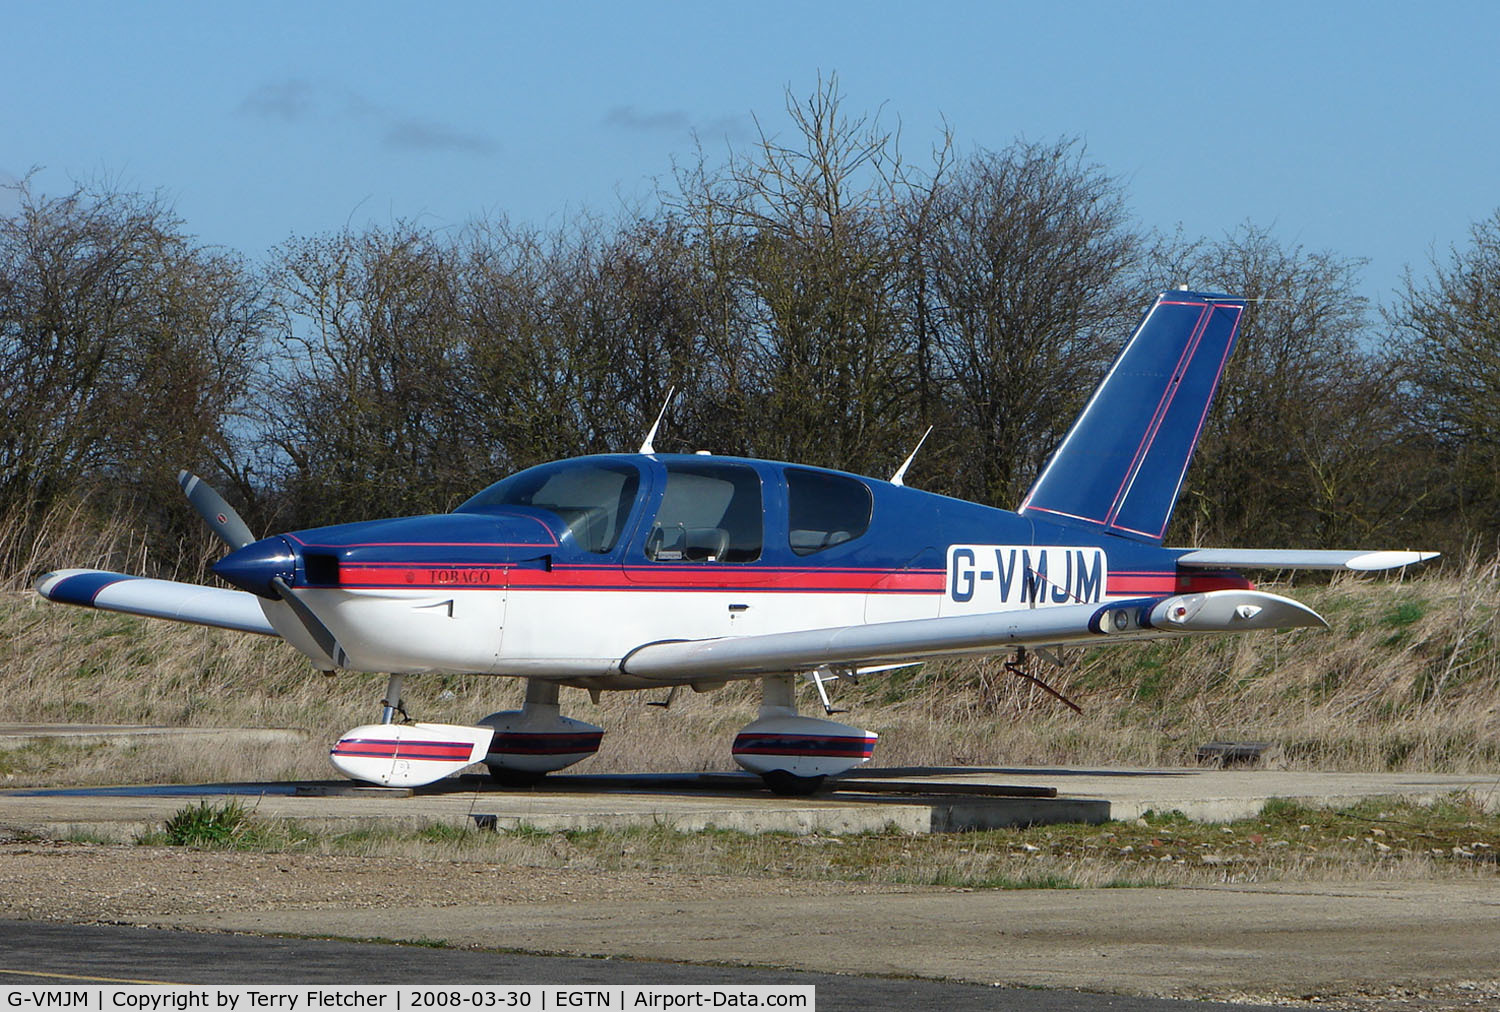 G-VMJM, 1991 Socata TB-10 Tobago C/N 1361, One aircraft at the friendly Enstone Airfield in Oxfordshire